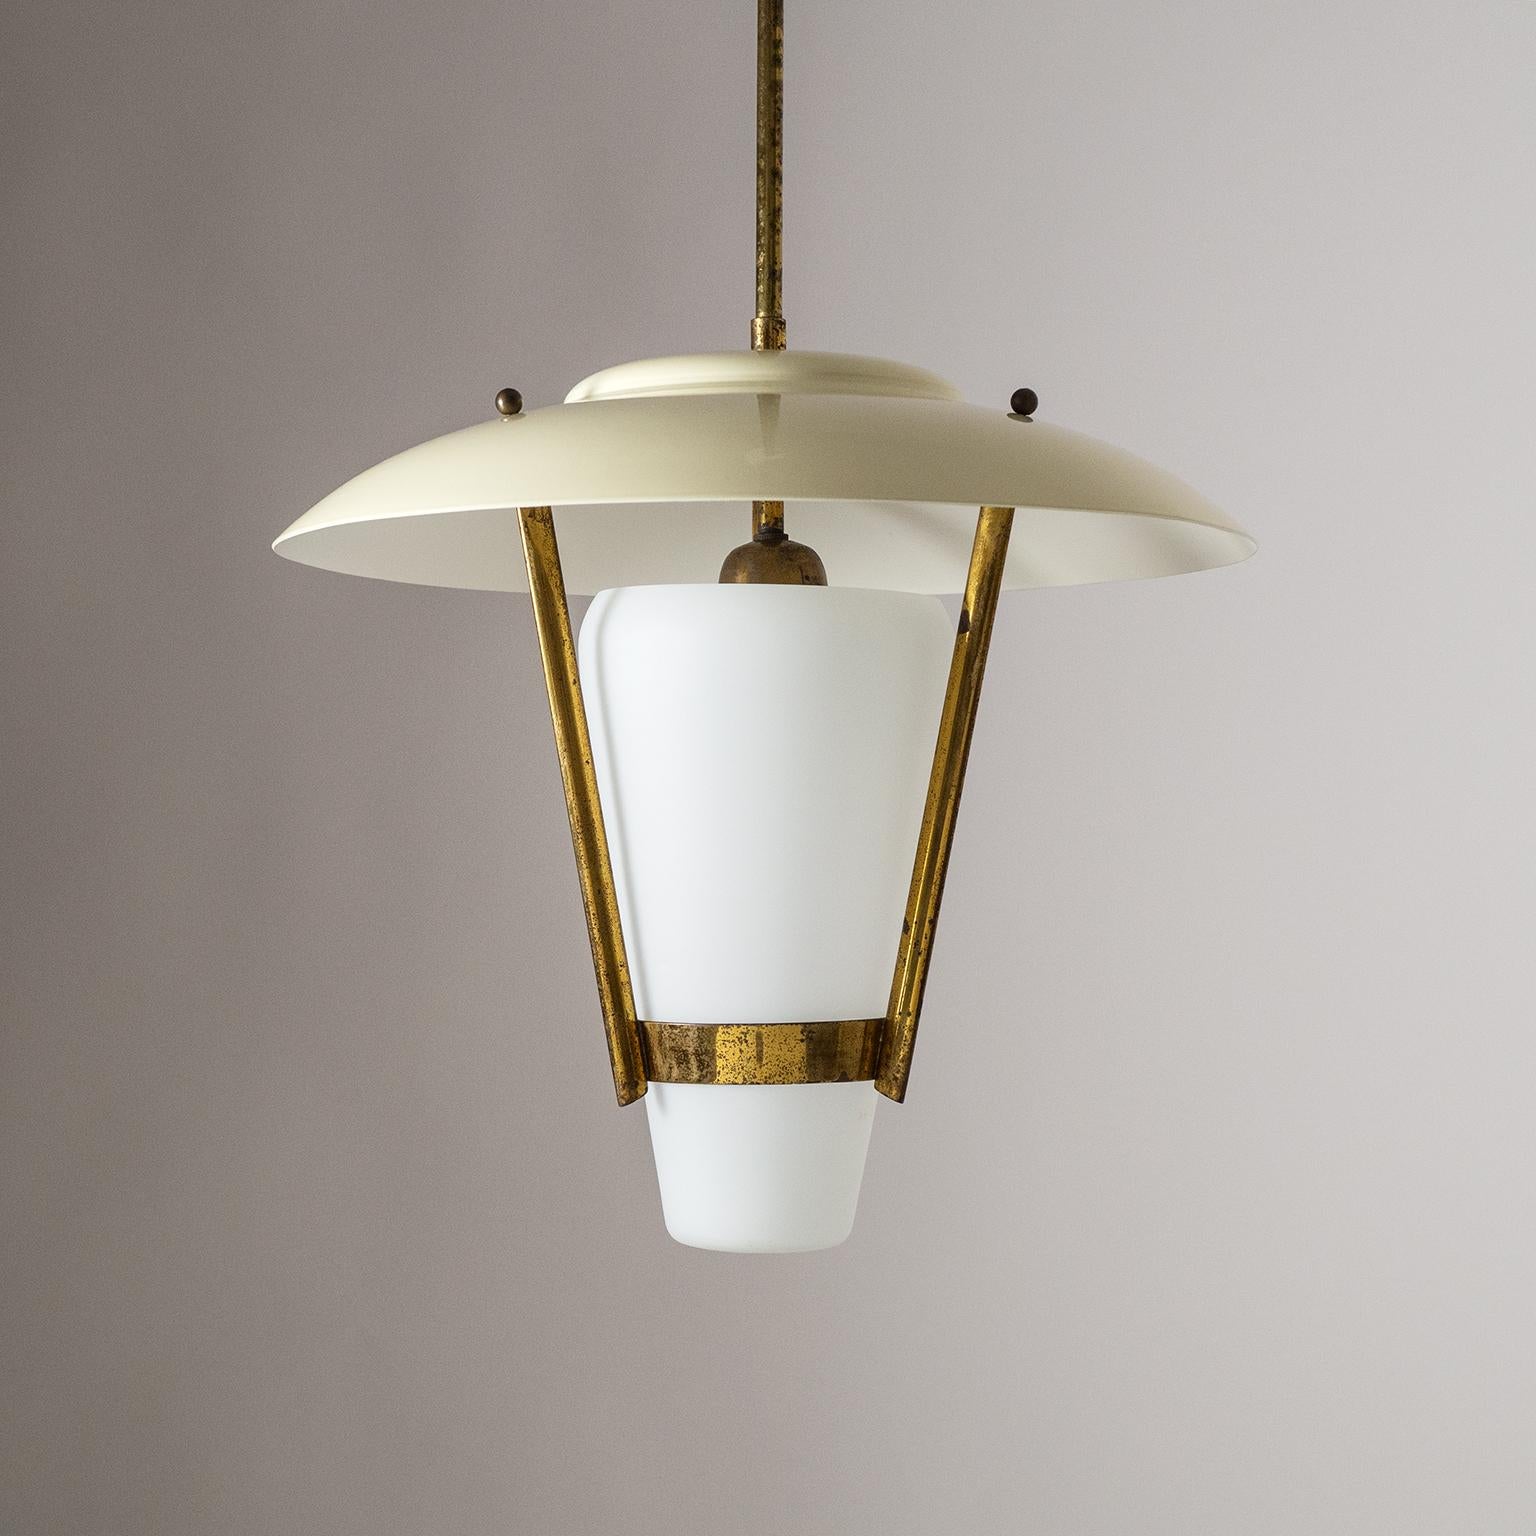 Modernist Italian lantern/pendant from the 1950s attributed to Stilnovo. Brass hardware with a satin glass diffuser and ivory lacquered aluminum shade. One original brass and ceramic E27 socket with new wiring.
Measures: Shade diameter